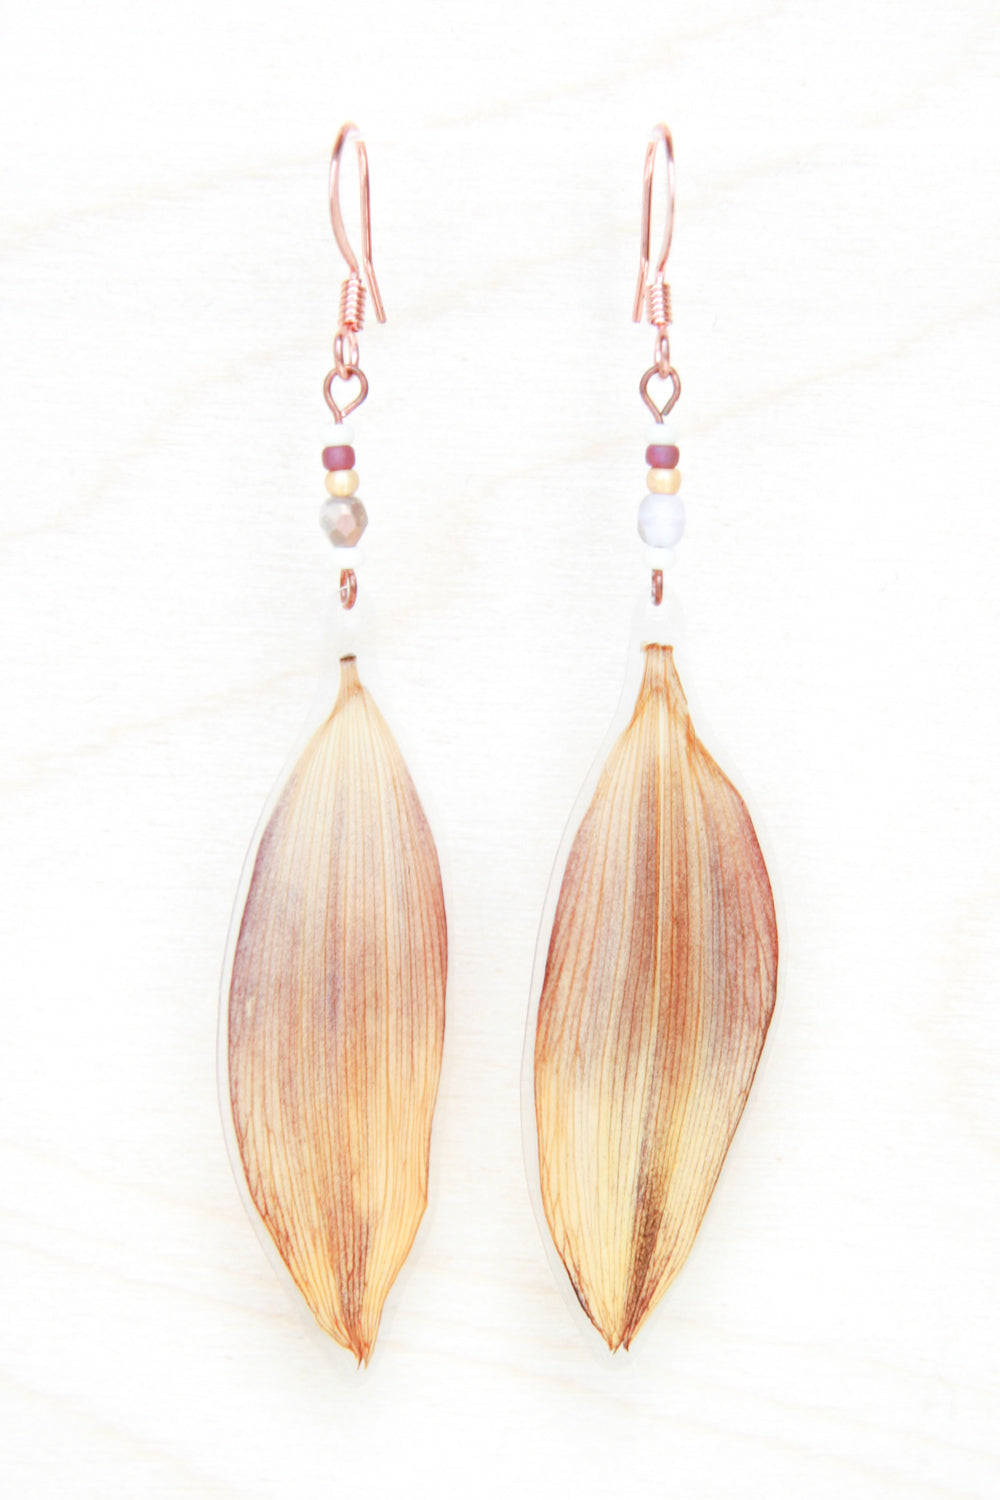 Brown & Yellow Sunflower Pressed Flower Earrings with Cranberry, Gold & Cream Glass Beads